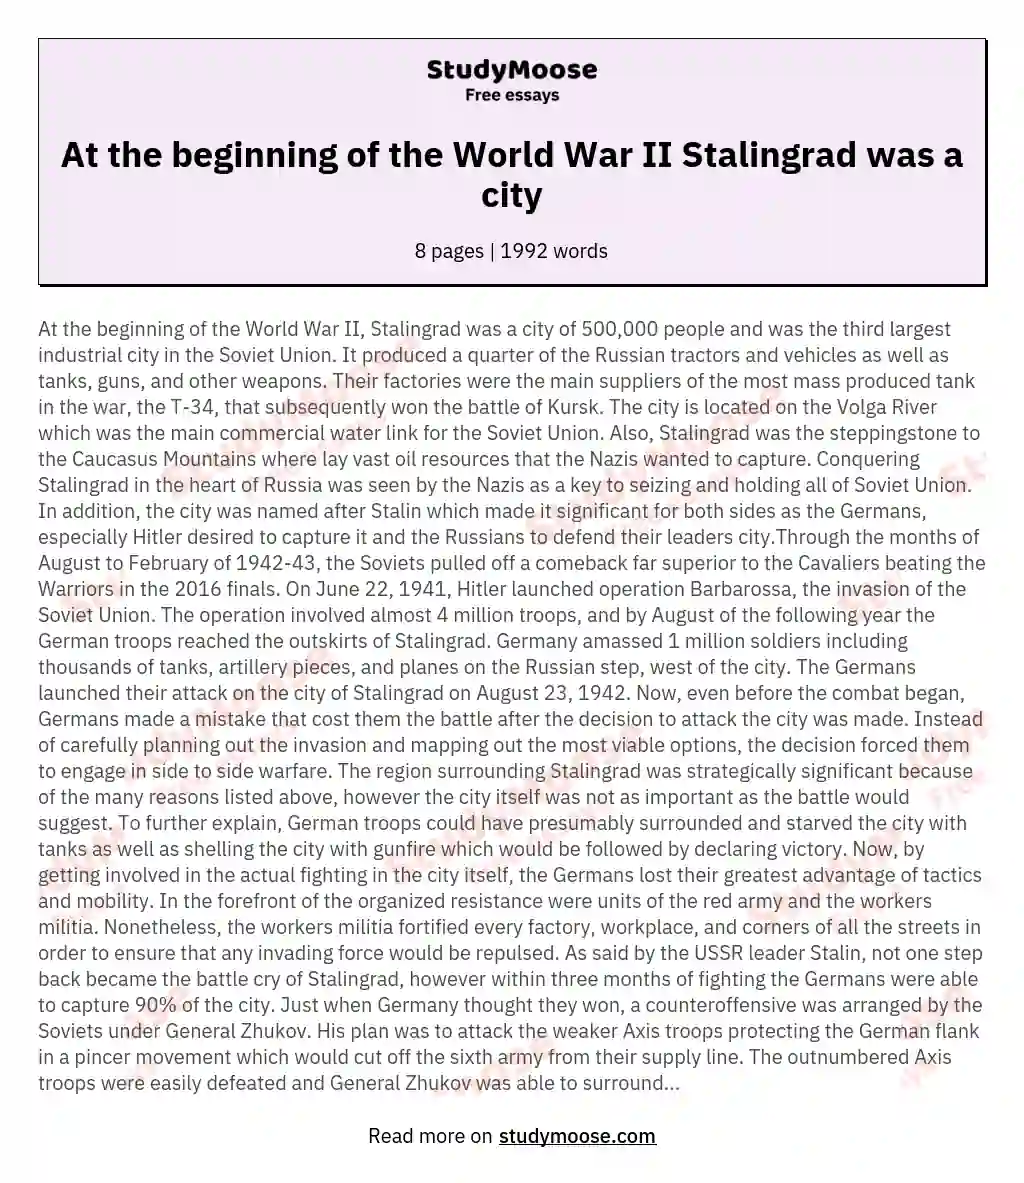 At the beginning of the World War II Stalingrad was a city essay